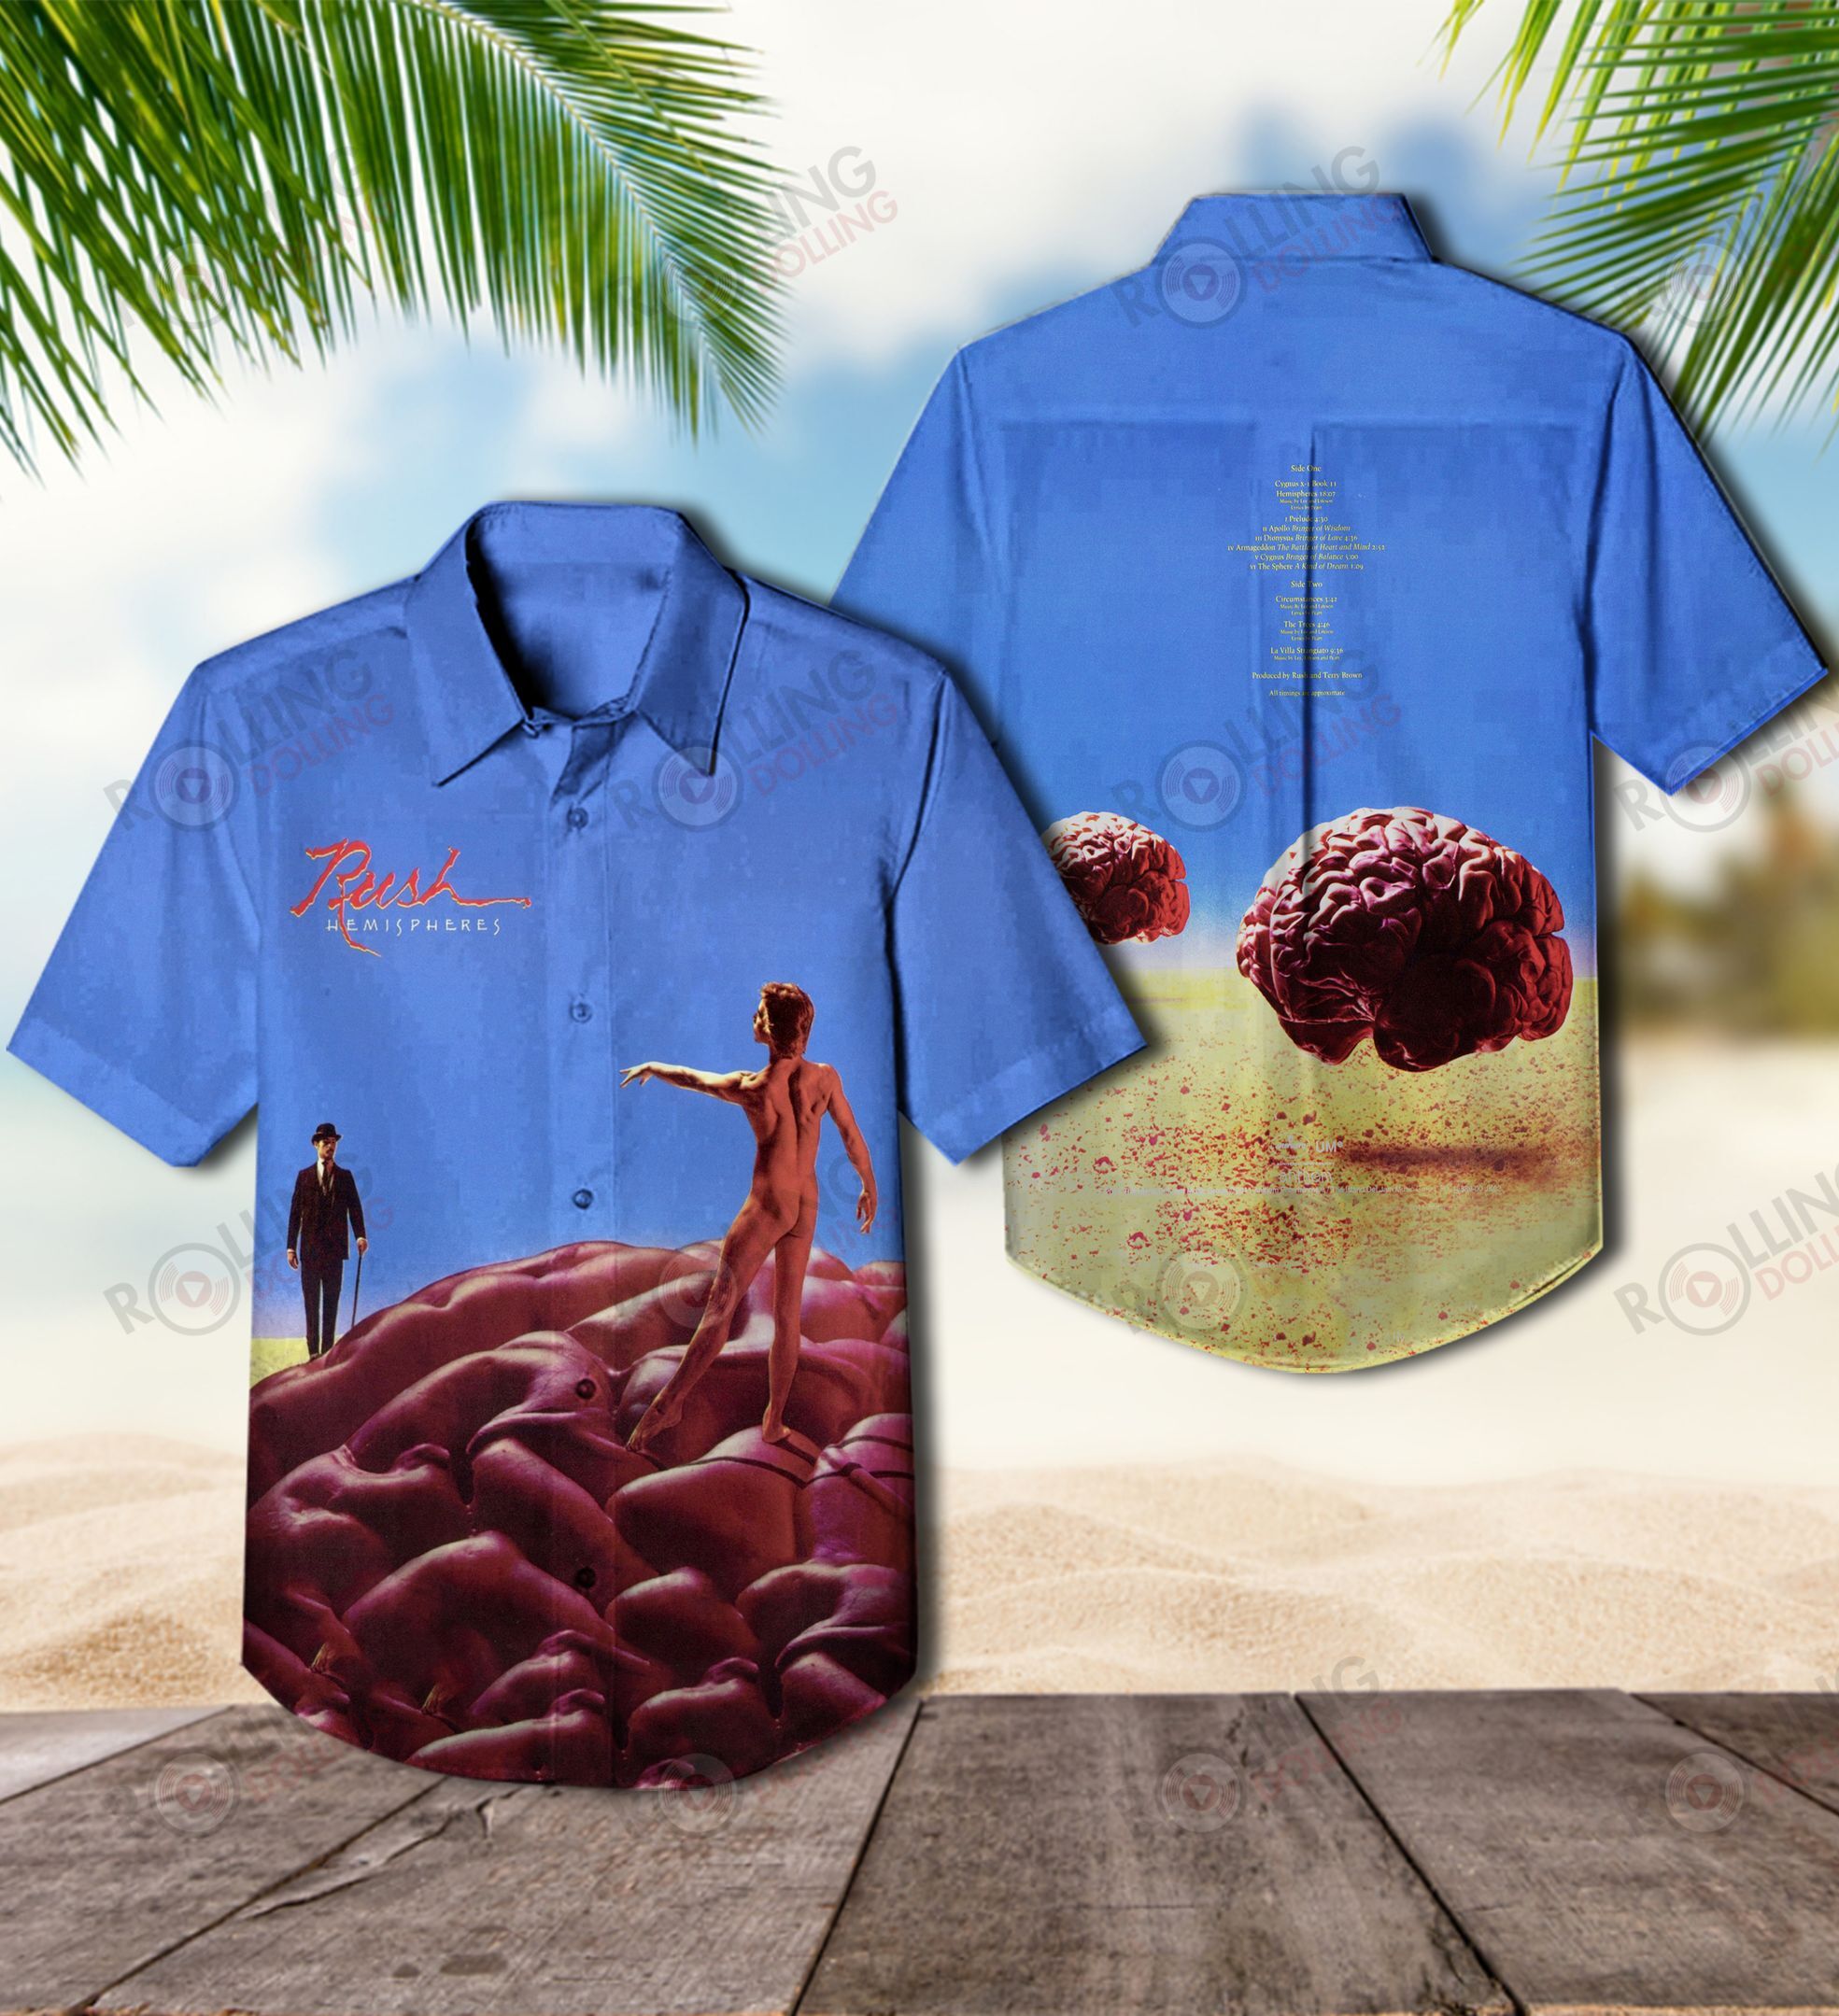 Check out these top 100+ Hawaiian shirt so cool for rock fans 419